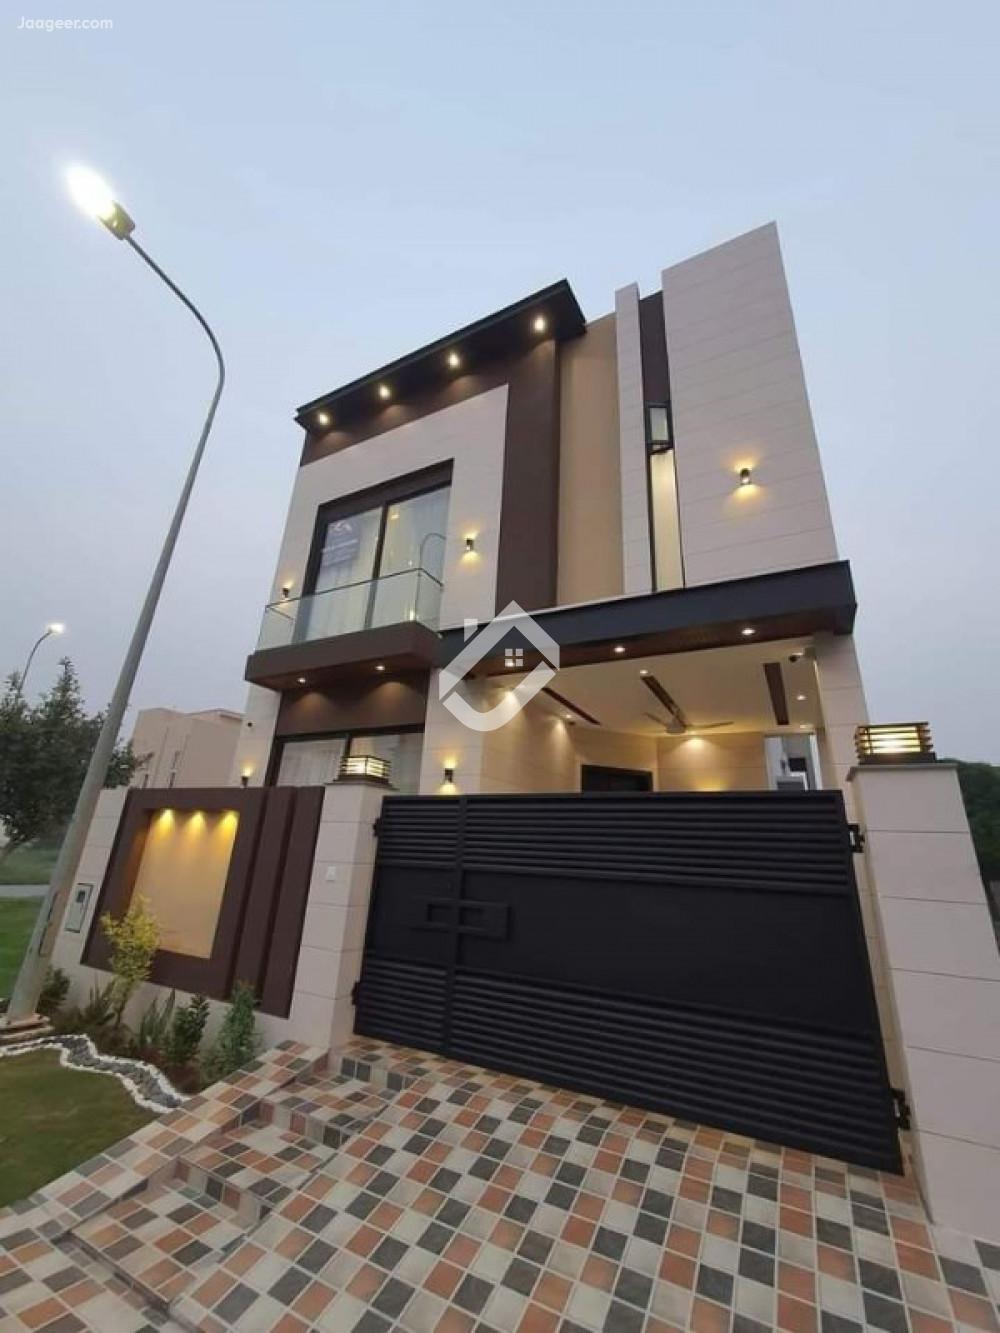 Main image 5 Marla Double Storey House For Sale In DHA Phase 6  --